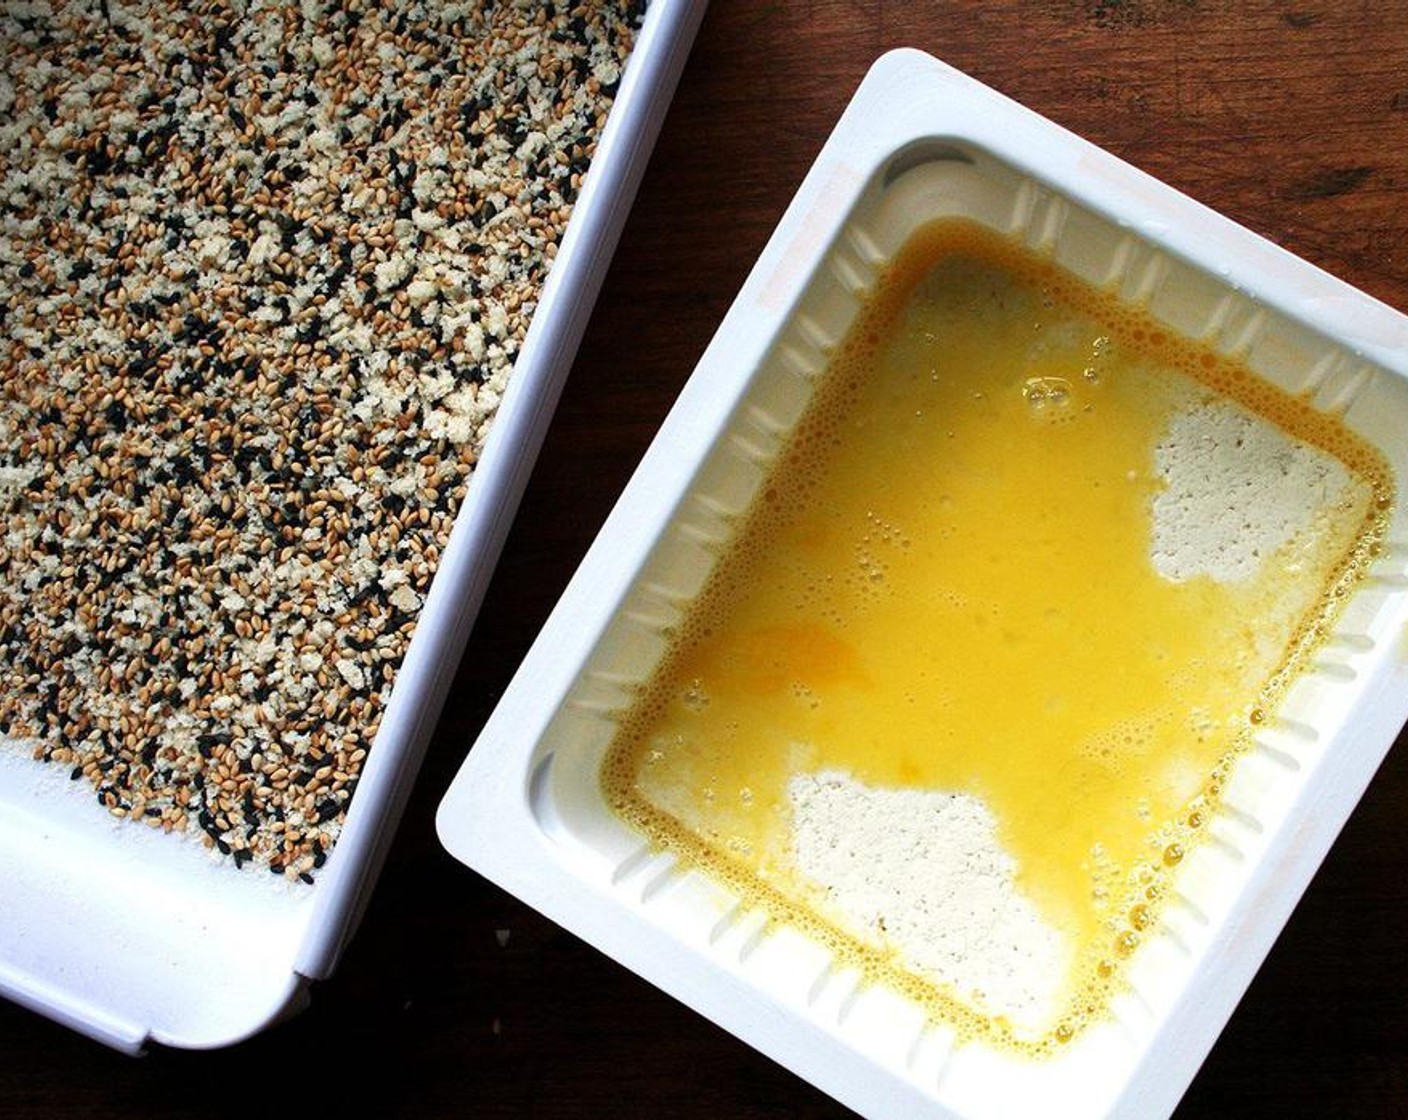 step 4 In a small shallow vessel with sides, beat the Egg (1) with 1 tsp Water. In another small shallow vessel with sides, stir together the Kosher Salt (1/4 tsp), Panko Breadcrumbs (3 Tbsp), White Sesame Seeds (2 Tbsp), and Black Sesame Seeds (1 Tbsp).